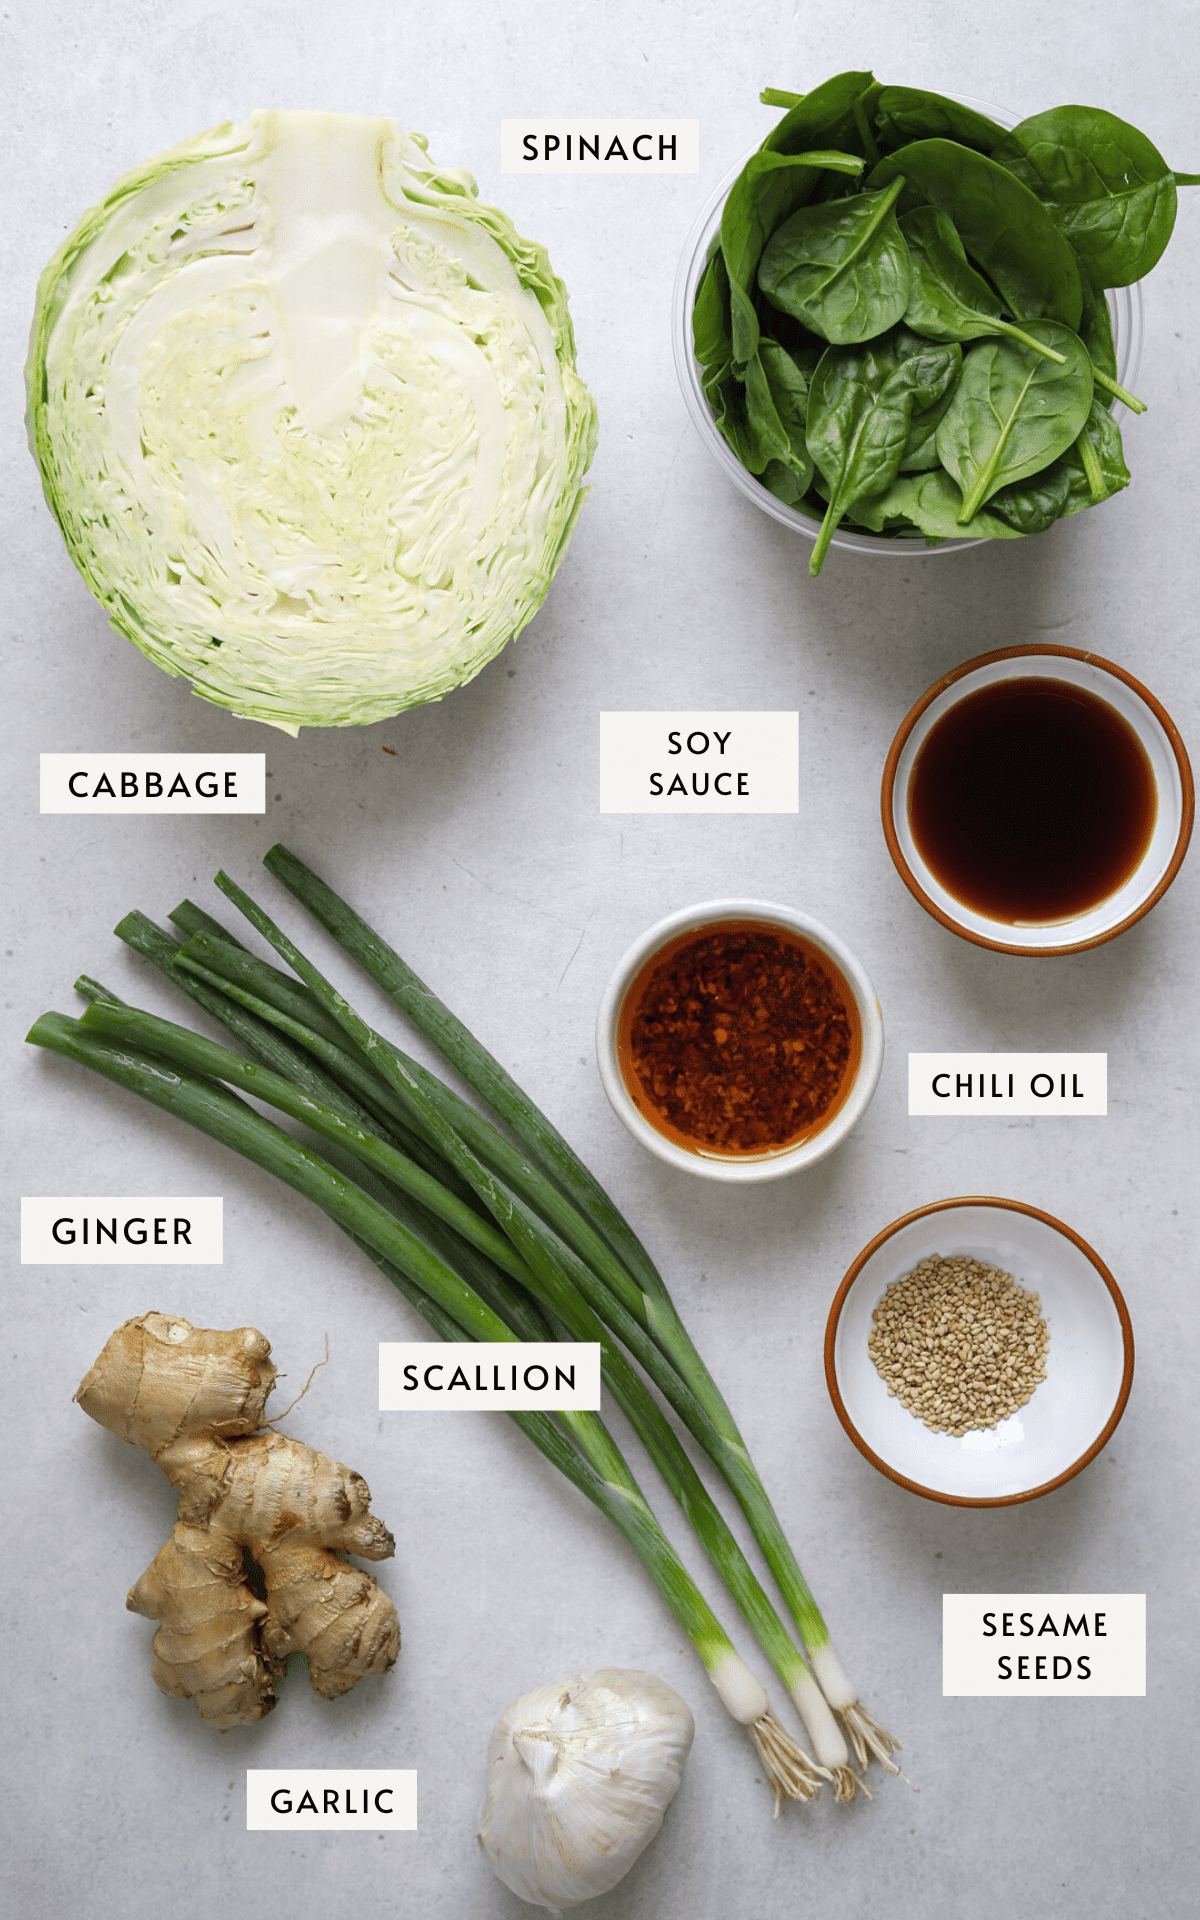 One whole head of cabbage cut in half, a cup of baby spinach, tiny dishes of; chili oil, sesame seeds and soy sauce, a whole head of garlic and a large knob of ginger.